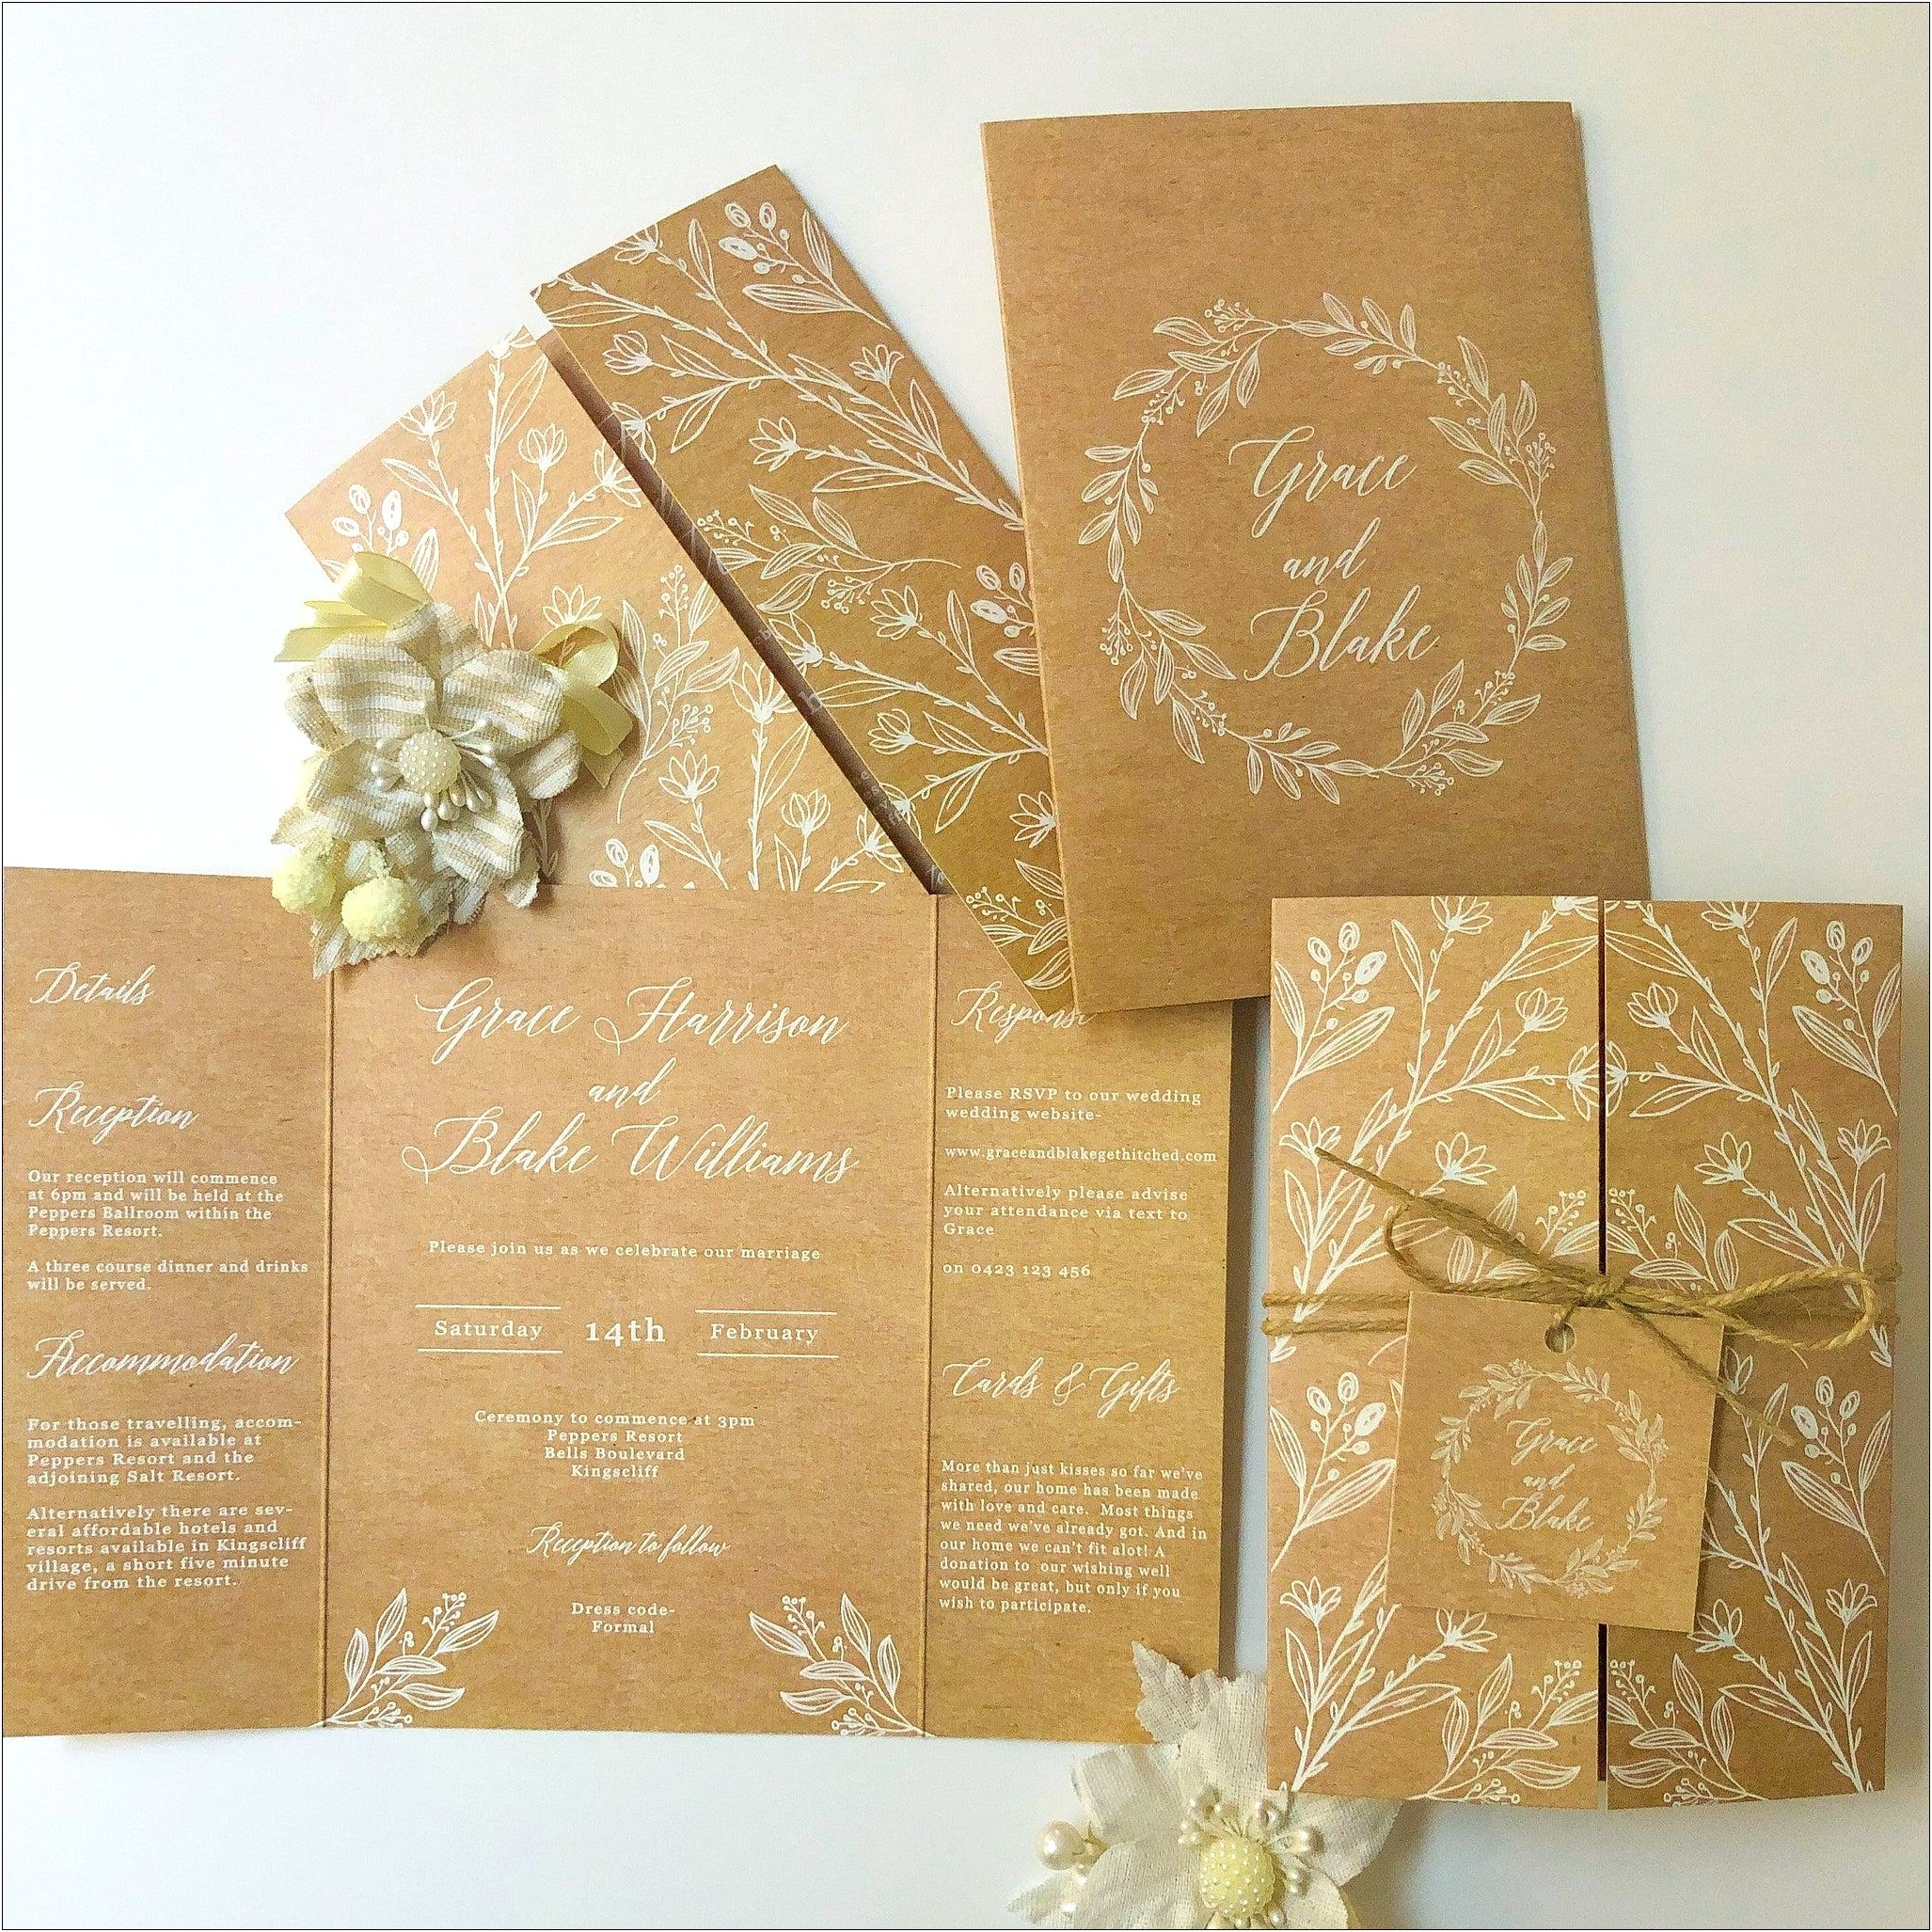 Does Walmart Print Wedding Invitations In The Store